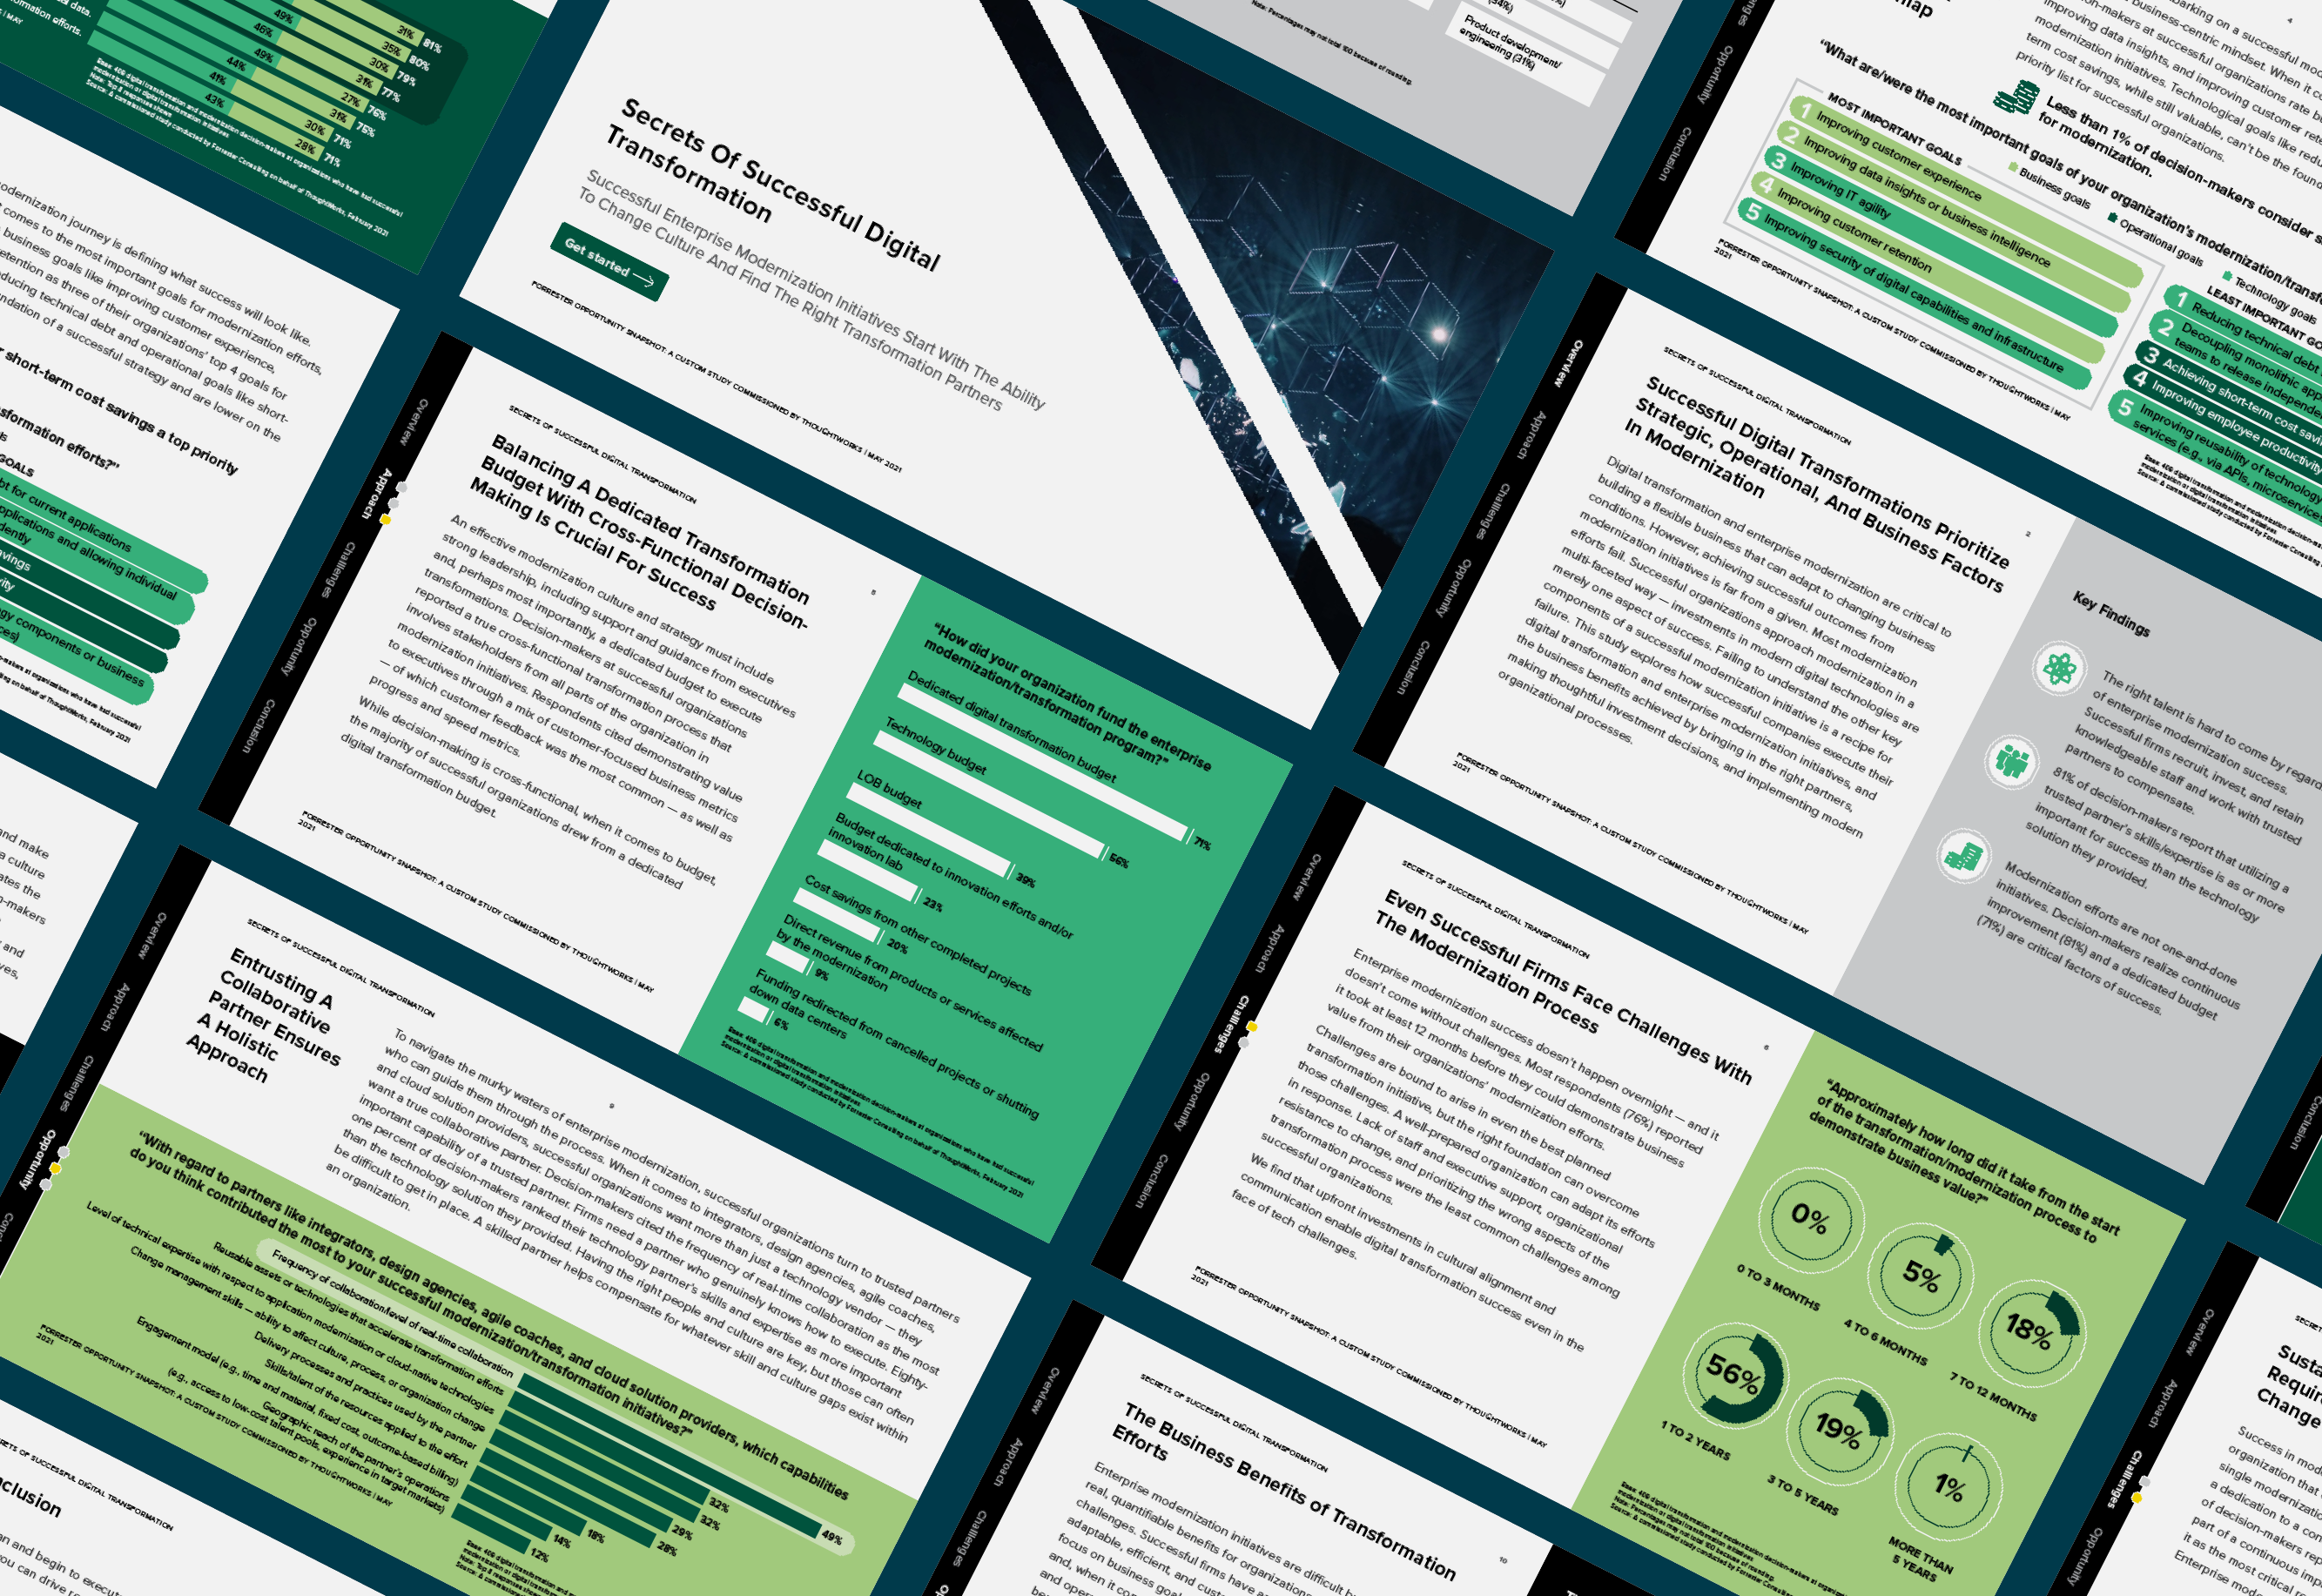 The secrets of successful digital transformation - a commissioned study conducted by Forrester Consulting, sponsored by Thoughtworks